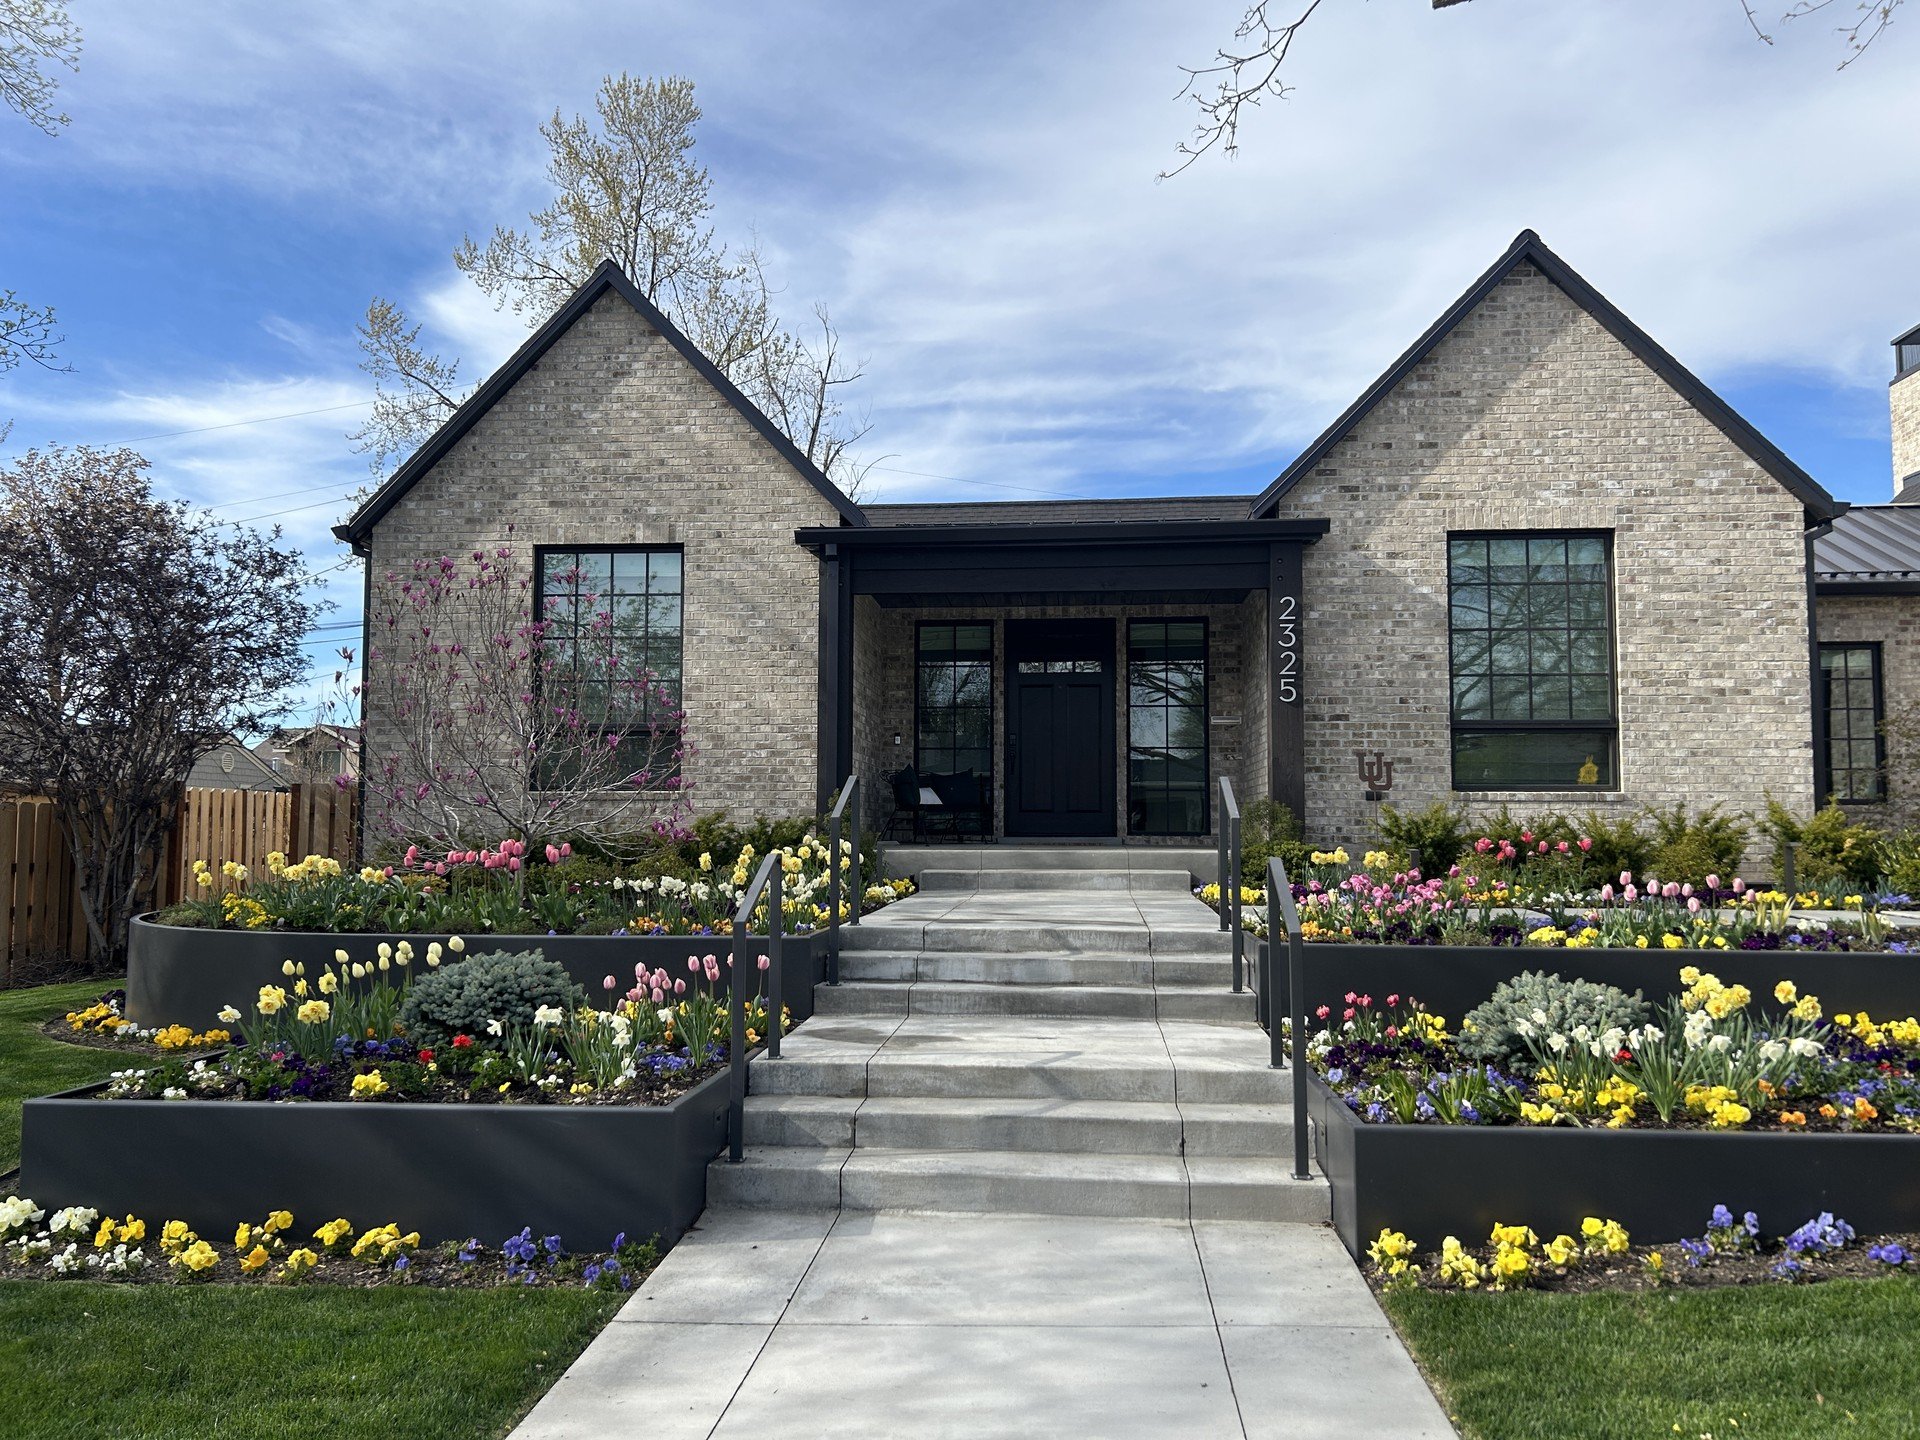 These colorful, cheerful flowers we planted in the front yard create a beautiful path for our clients to be welcomed home. #flowers #flowerlovers #spring #blooms #landscapedesign #landscape #landscapers #utahlandscapers #plantingbeds #utah